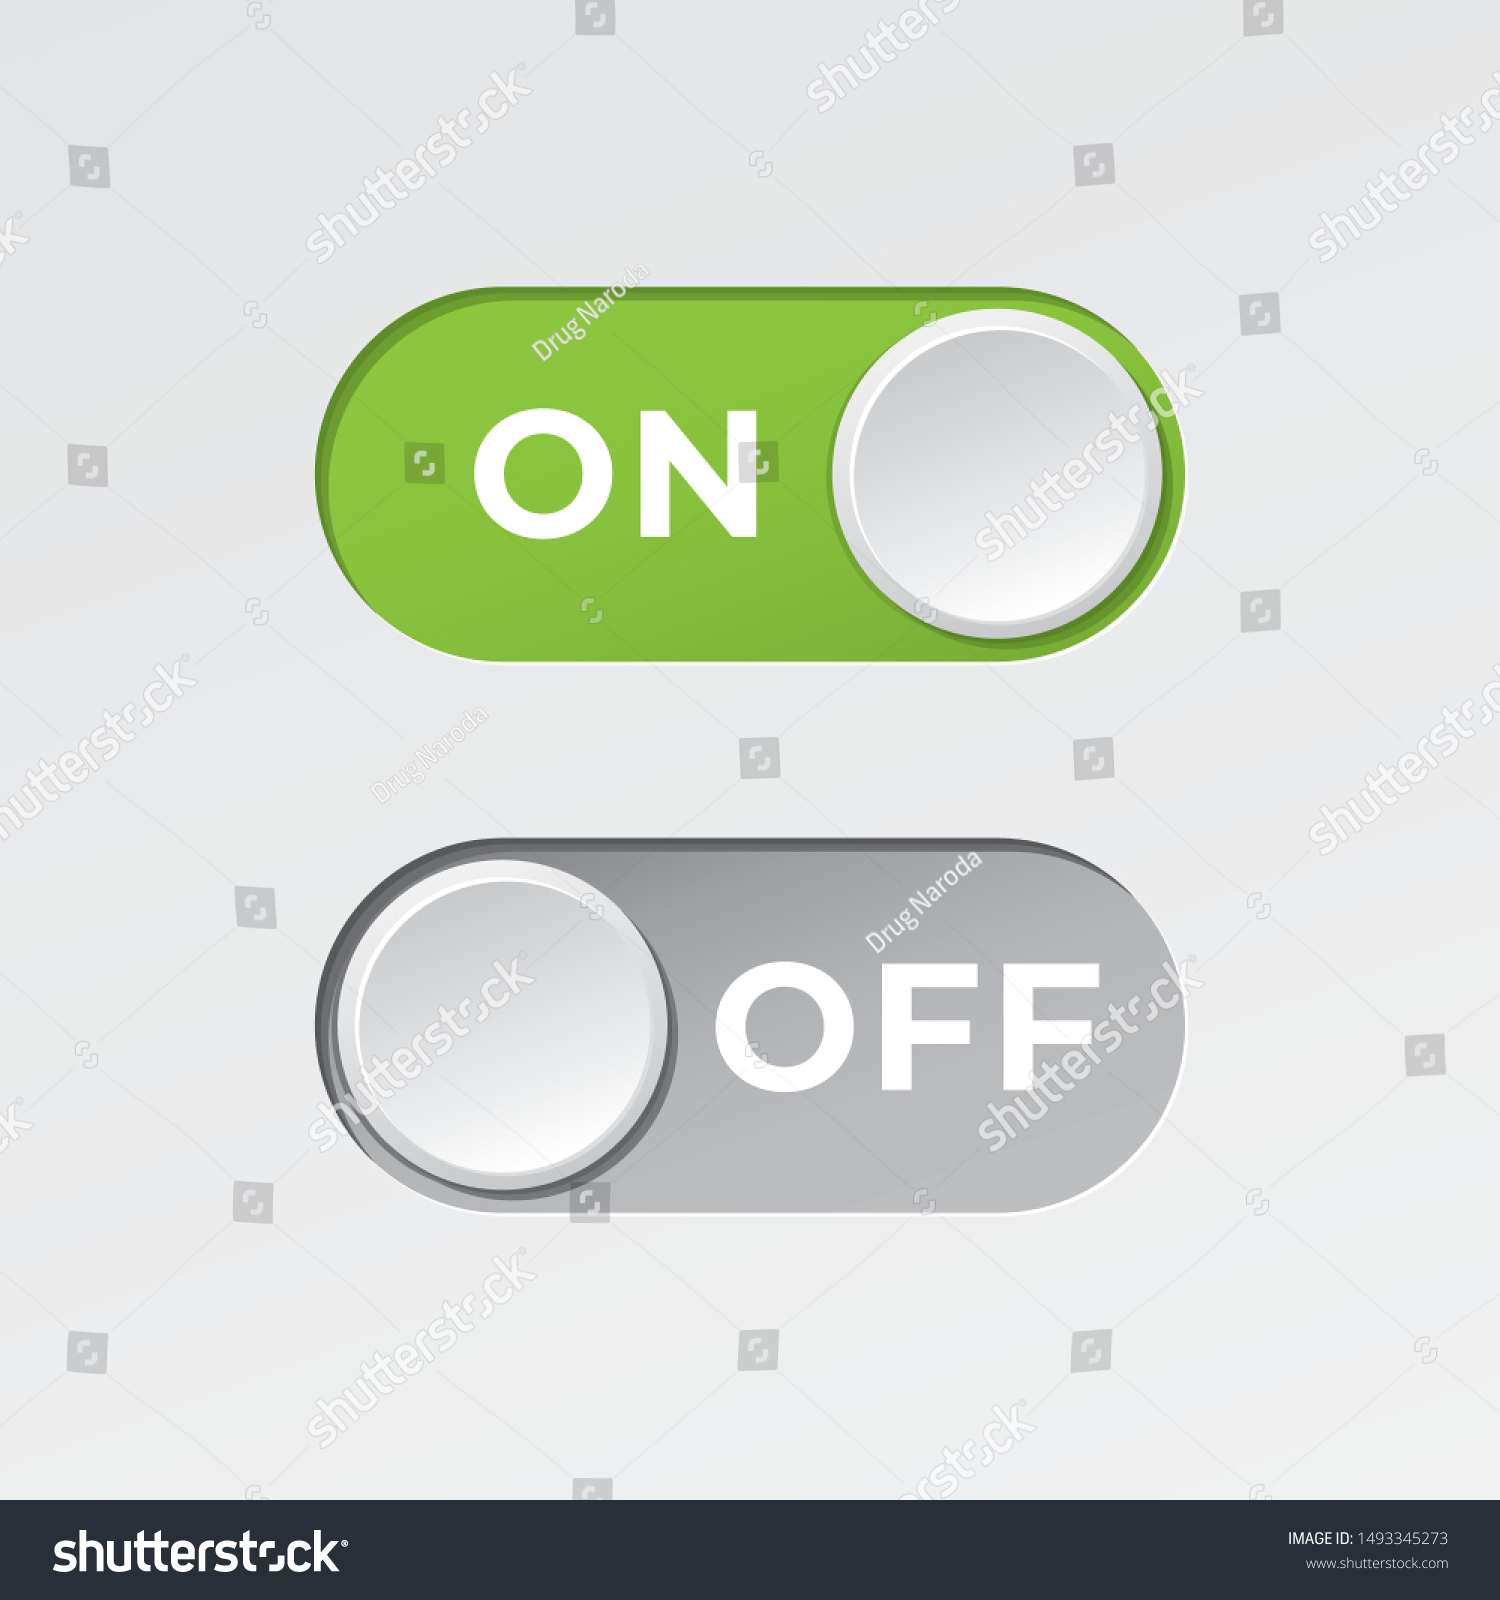 On and Off Toggle Switch Buttons with Lettering Modern Devices User Interface Mockup or Template - Green and Grey on White Background - Vector Gradient Graphic Design #1493345273